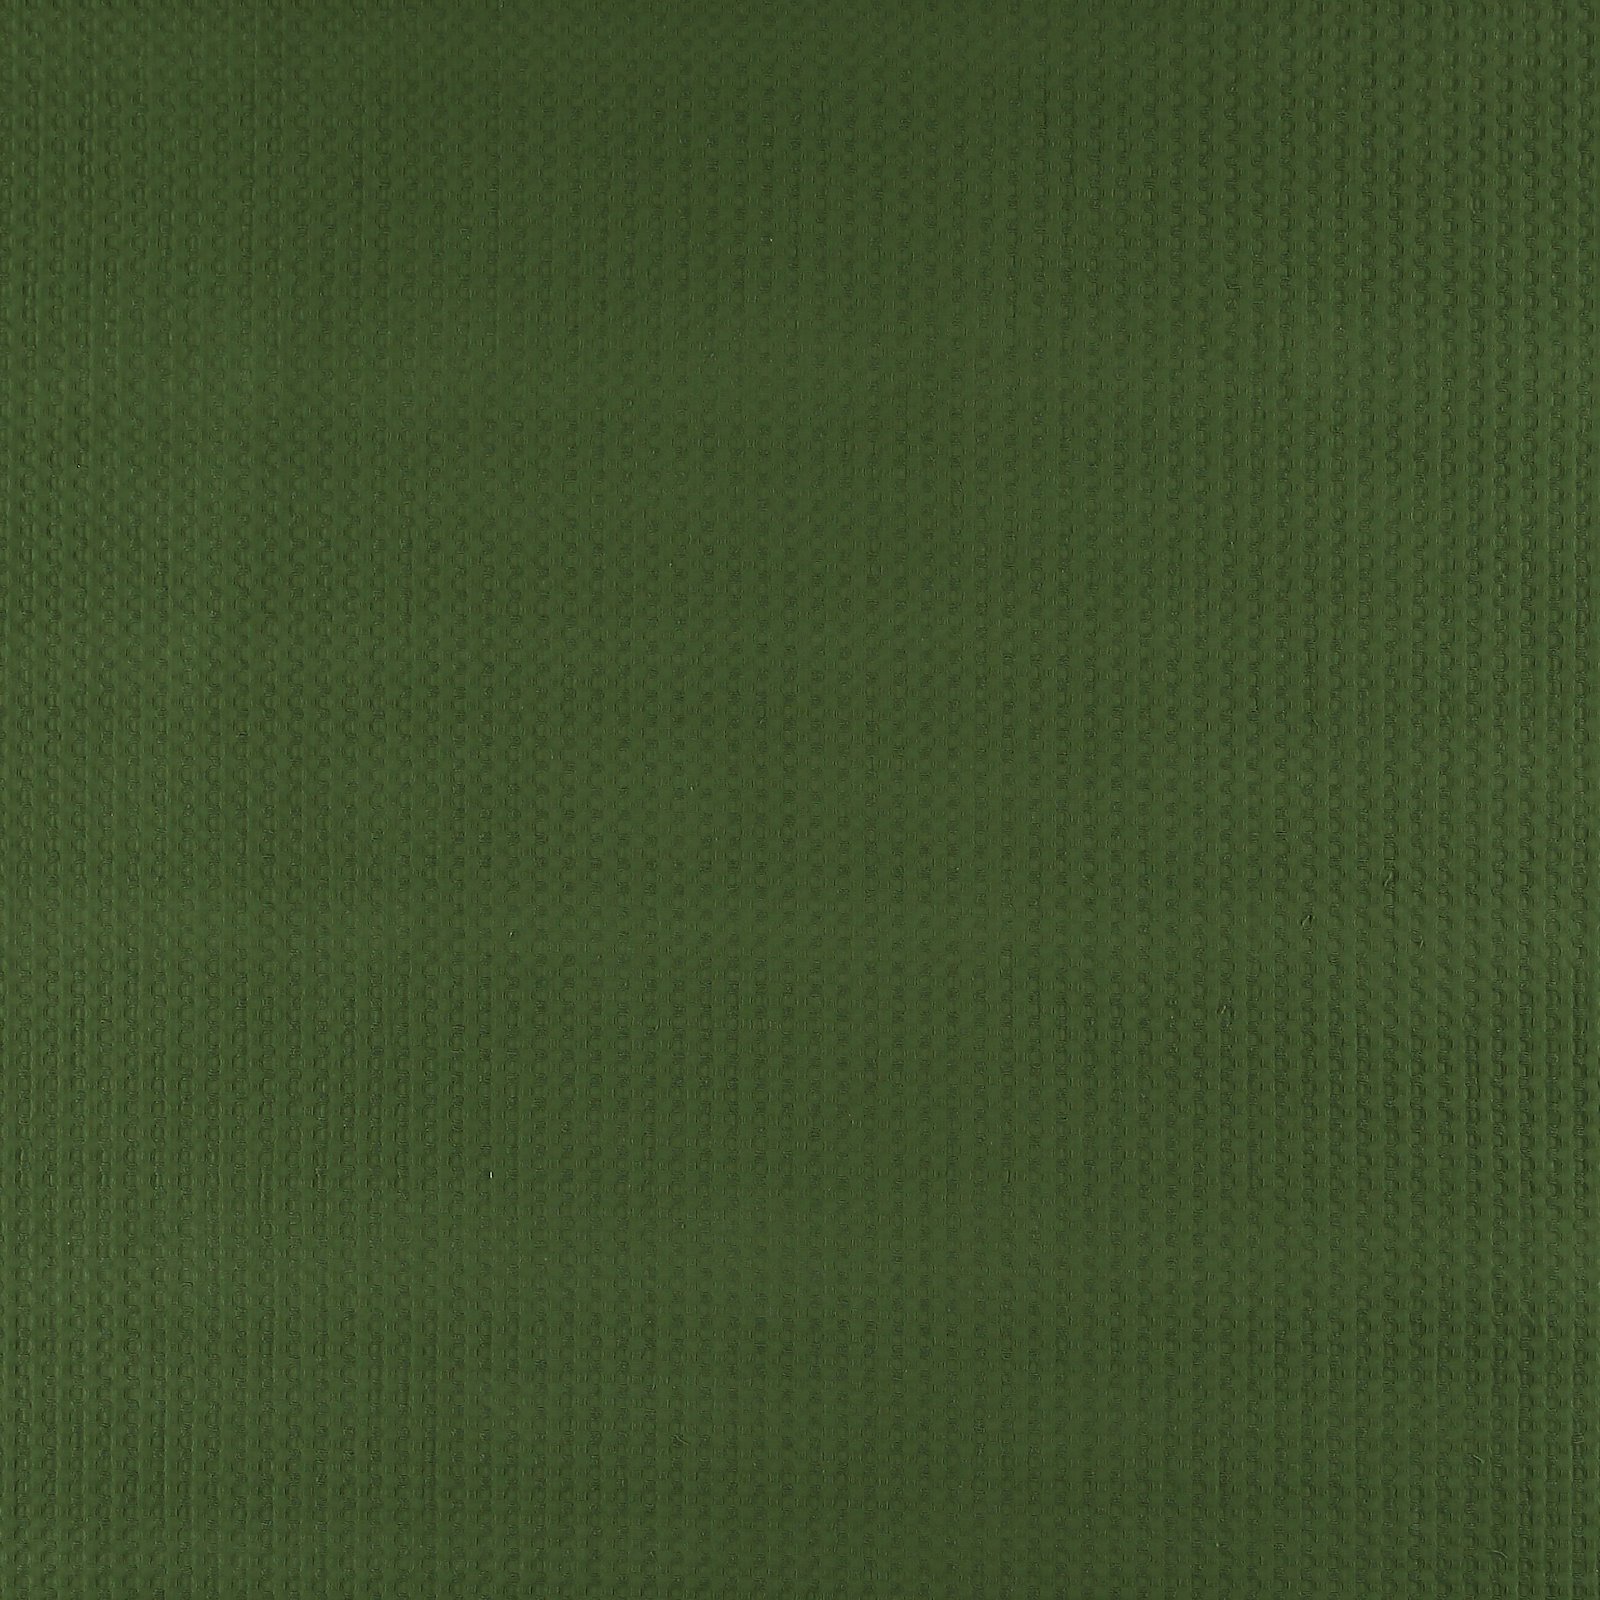 Woven jacquard leaf green w structure 501918_pack_solid